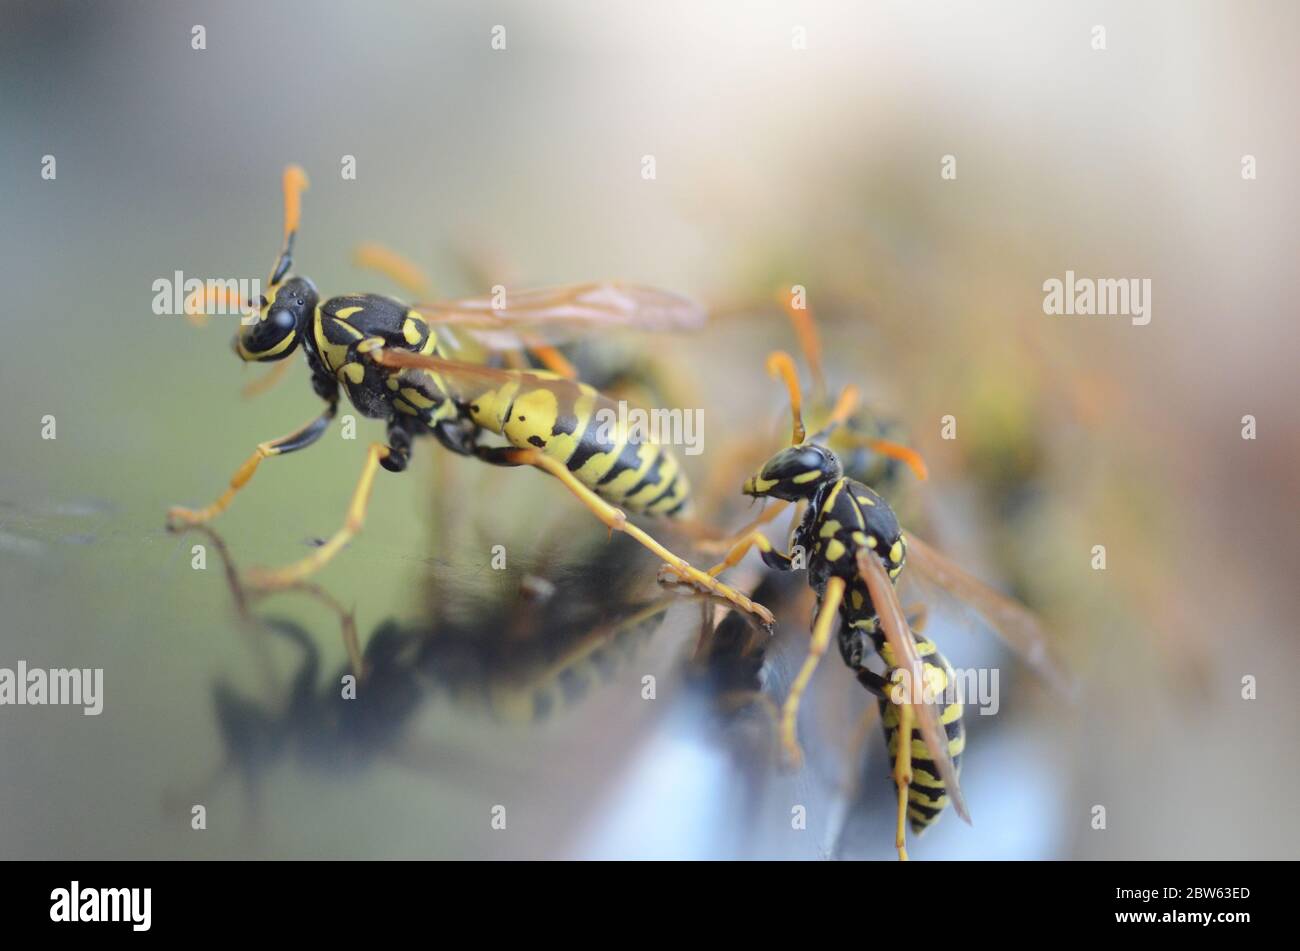 A pair of hornets, wasps, yellow jackets on a reflective surface. Stock Photo